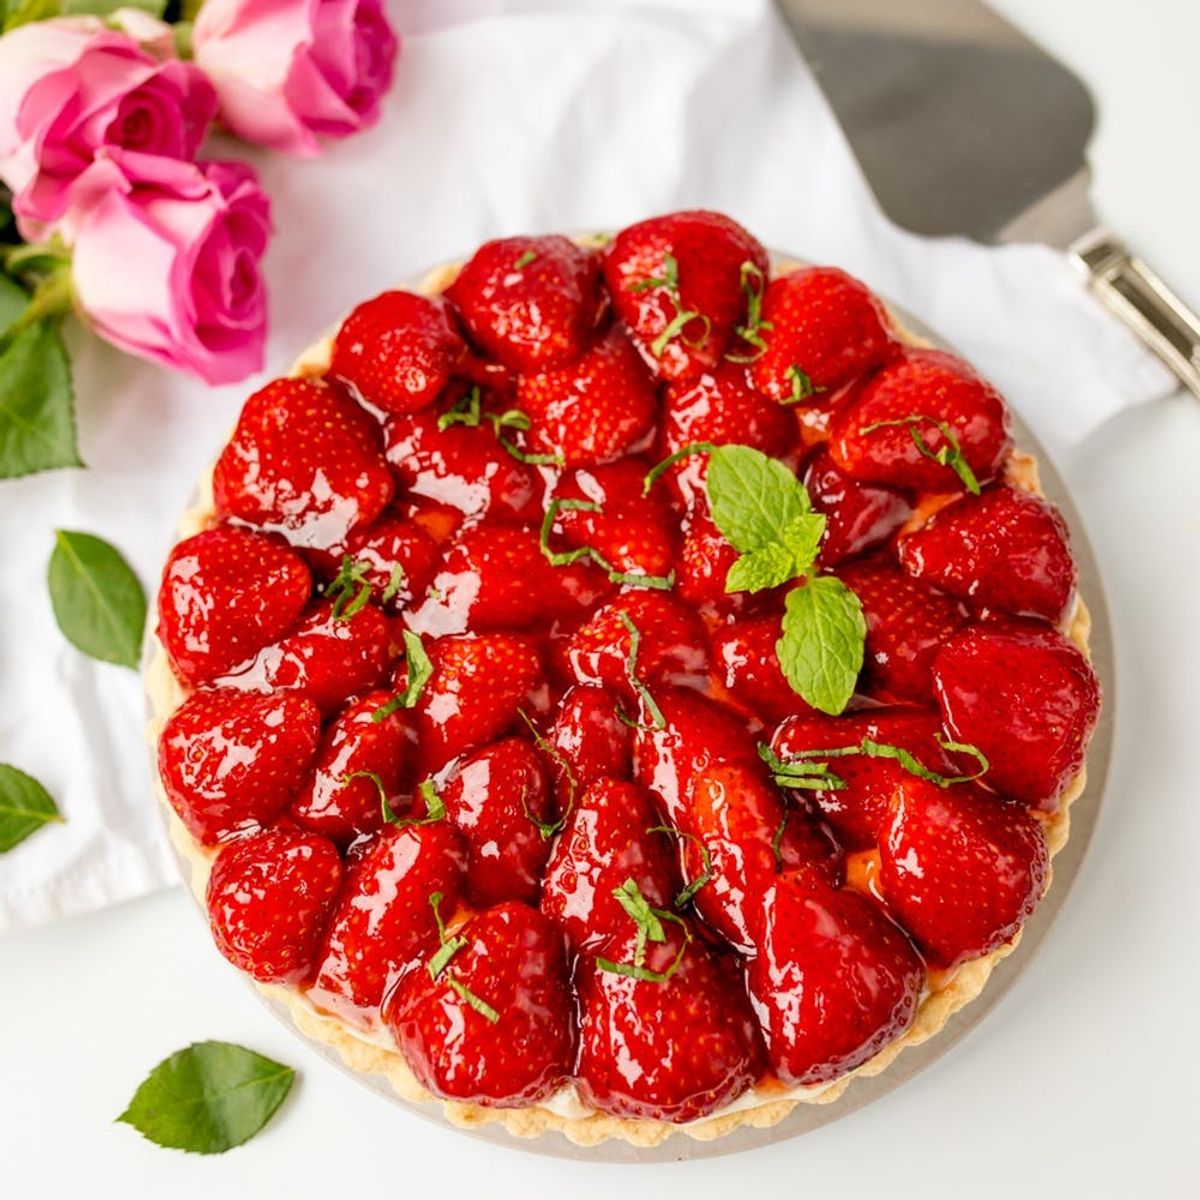 Our Homemade Strawberry Tart Hack Is the Perfect Recipe for a Happy Mother’s Day